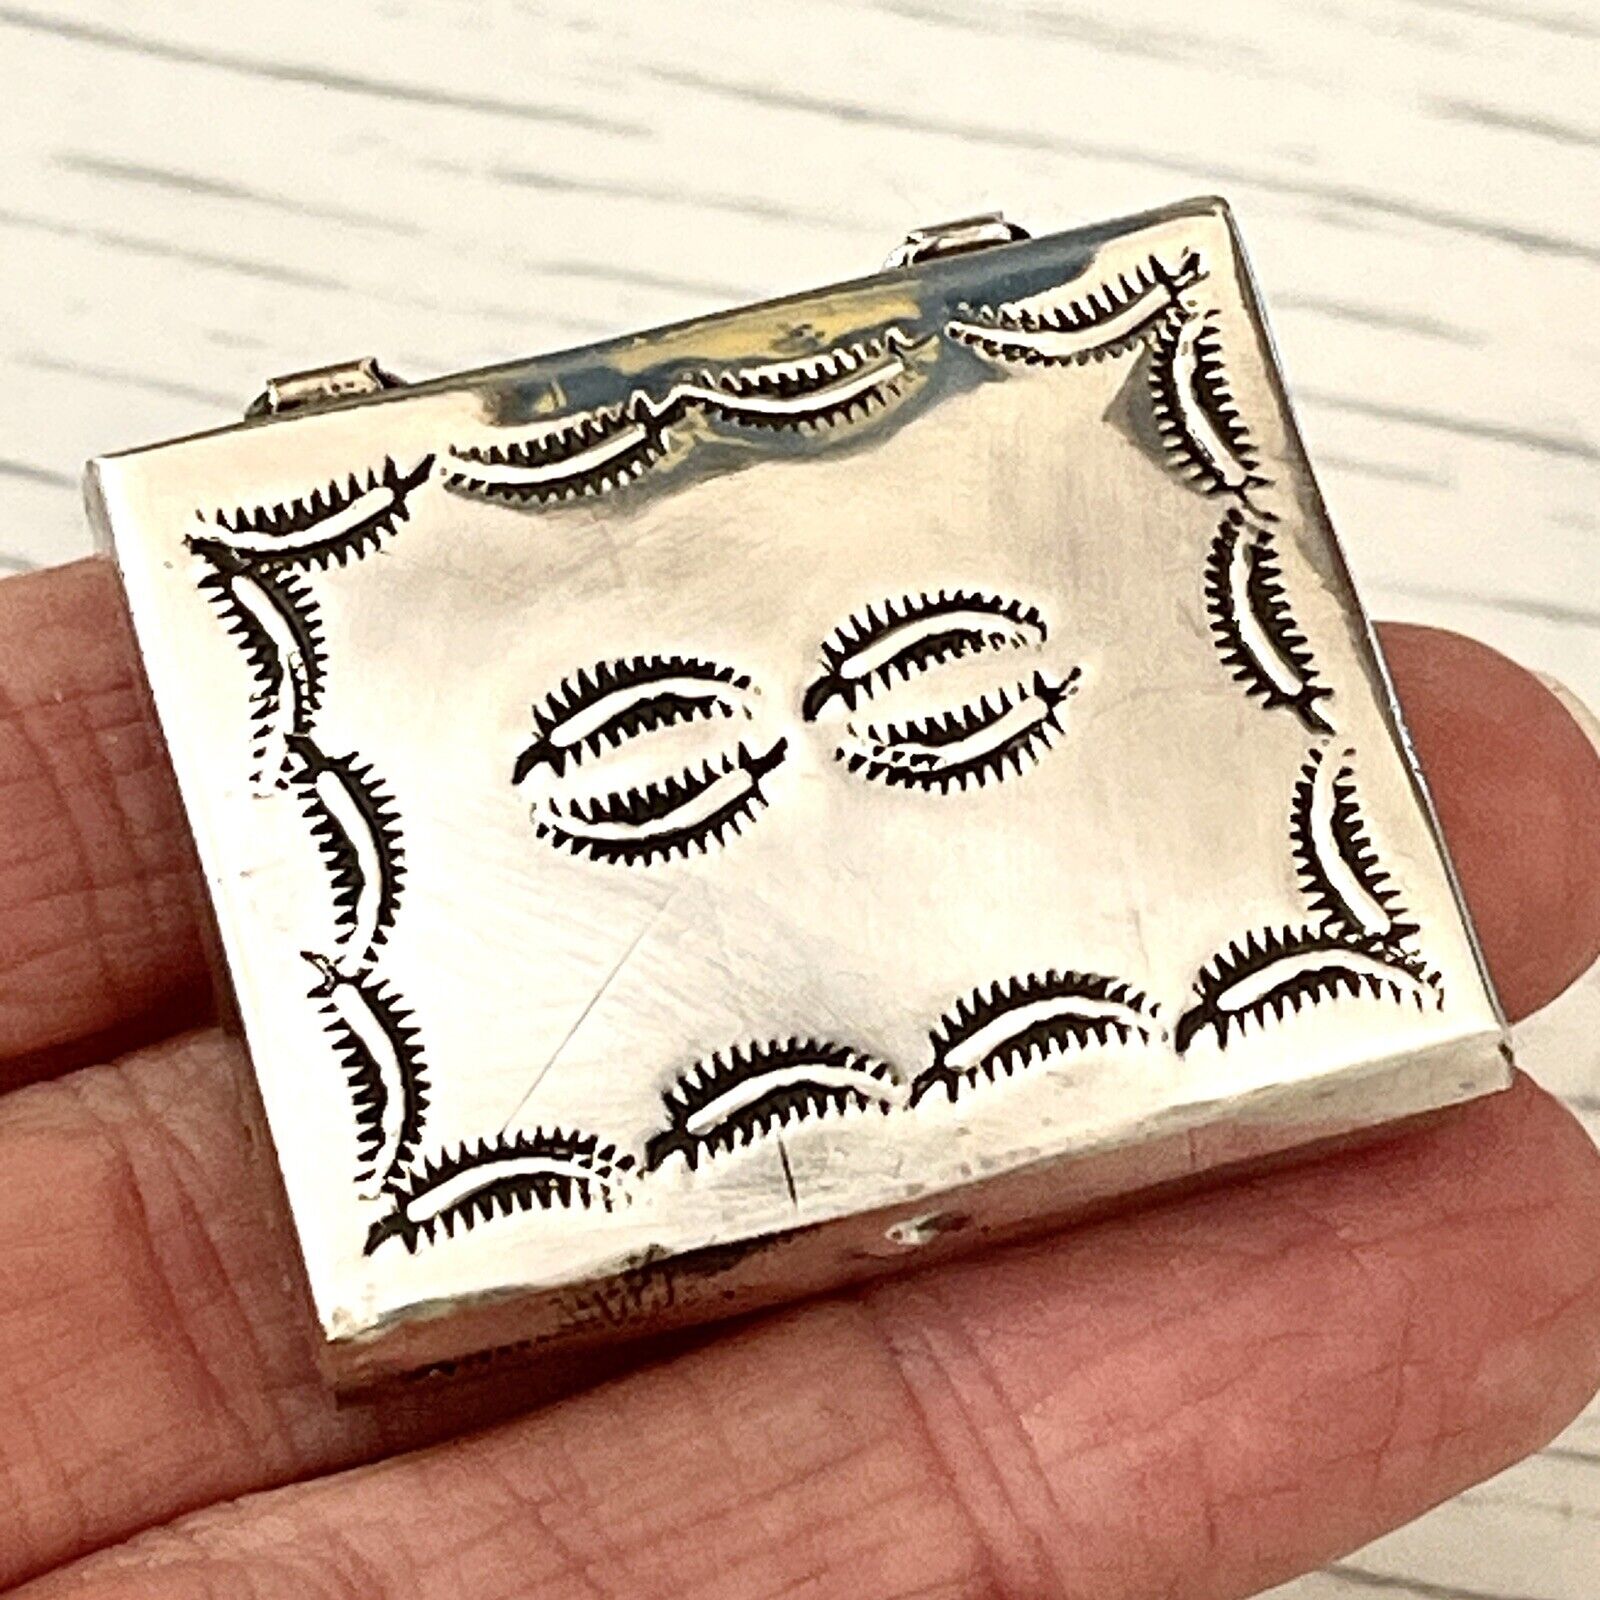 Navajo Pill Box Stamped Handmade Sterling Silver Signed Chee Stash Case Lidded